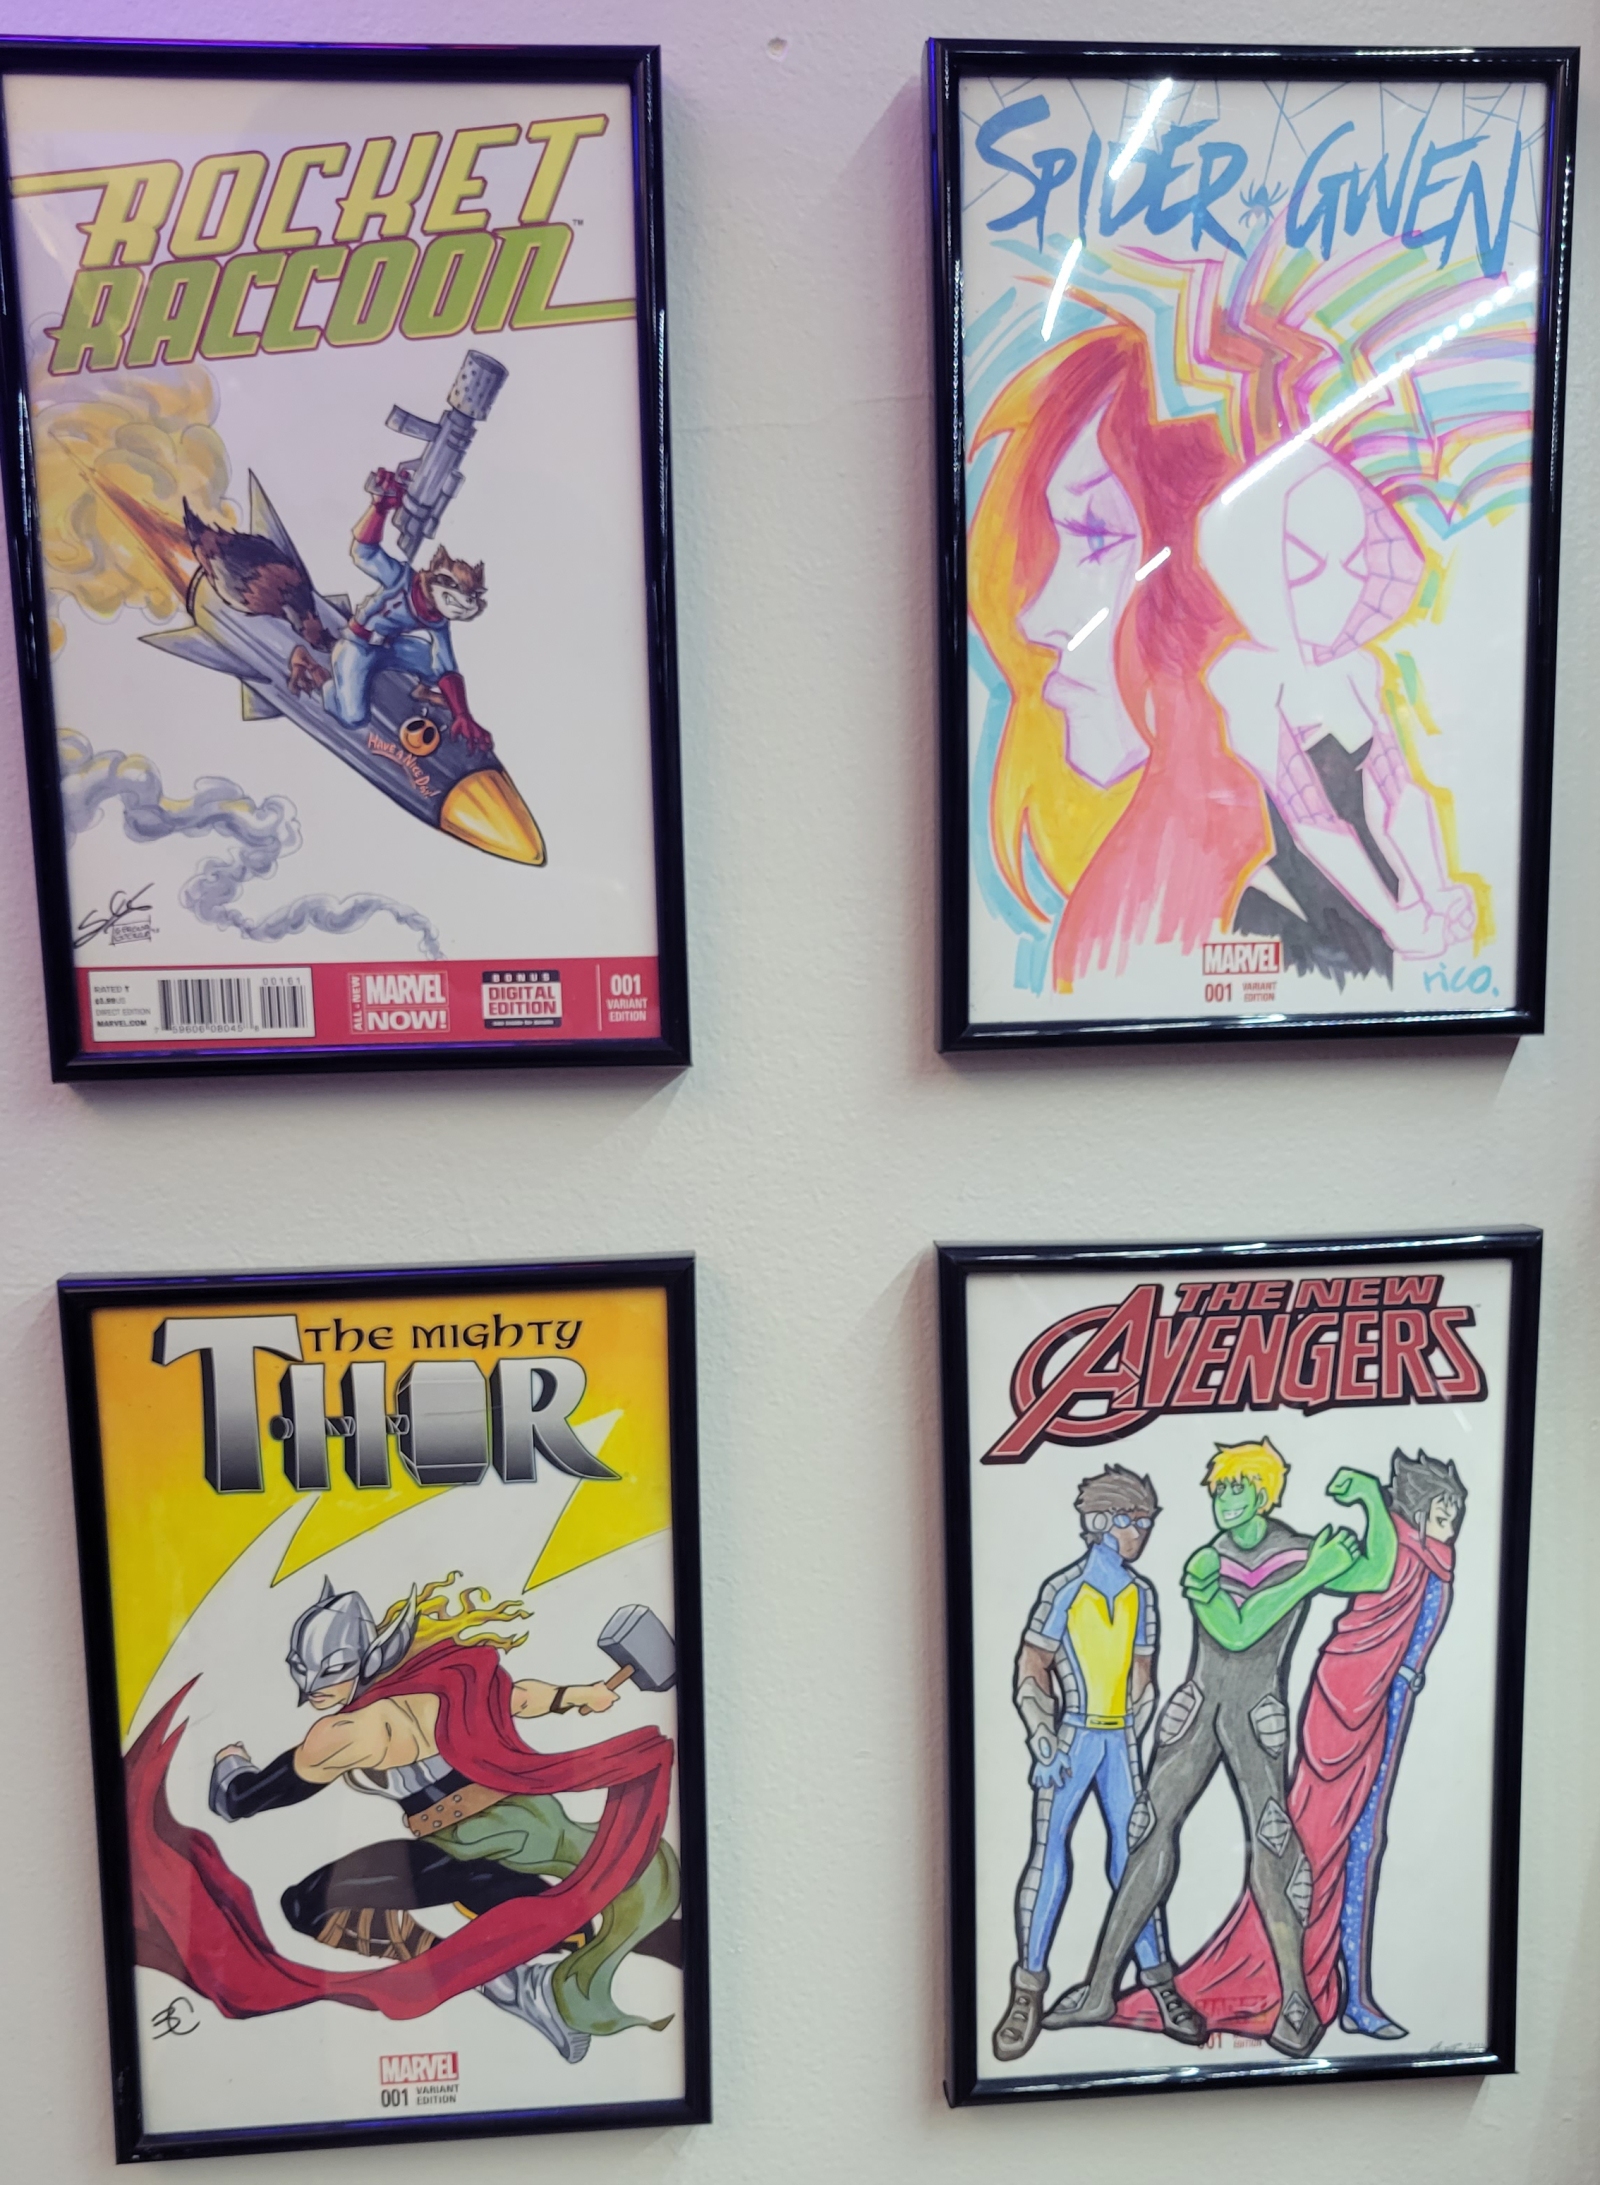 sketch covers Rocket by Serena Guerra, Spider-Gwen by Rico Renzi, Mighty Thor by Bridgit Connell